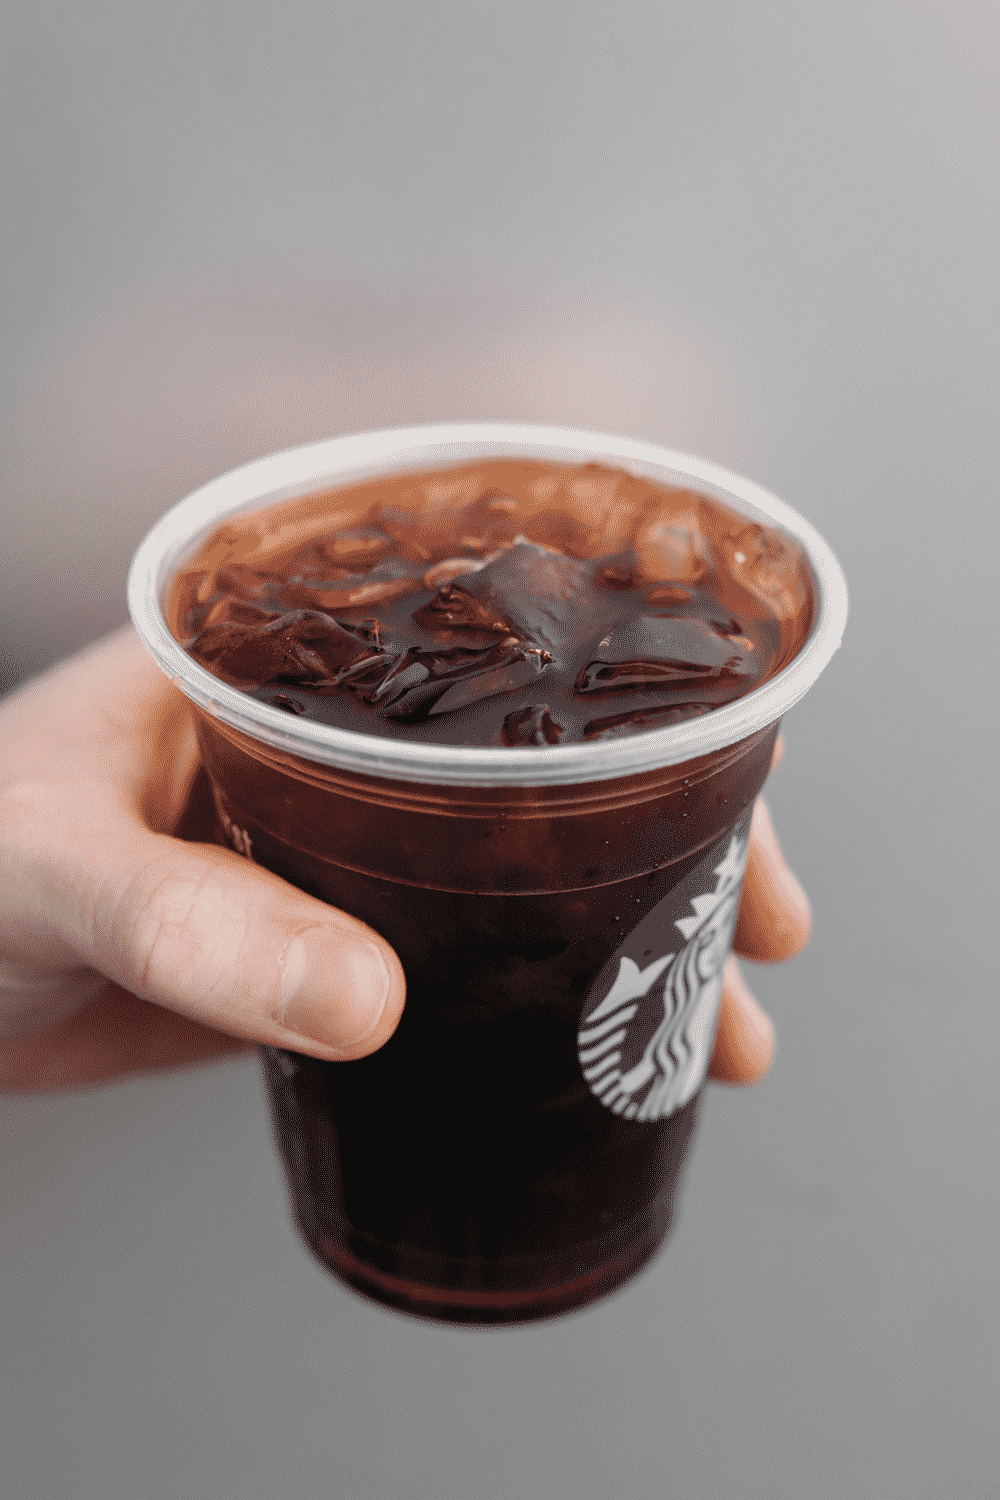 A hand holding a cup of Starbucks iced coffee.